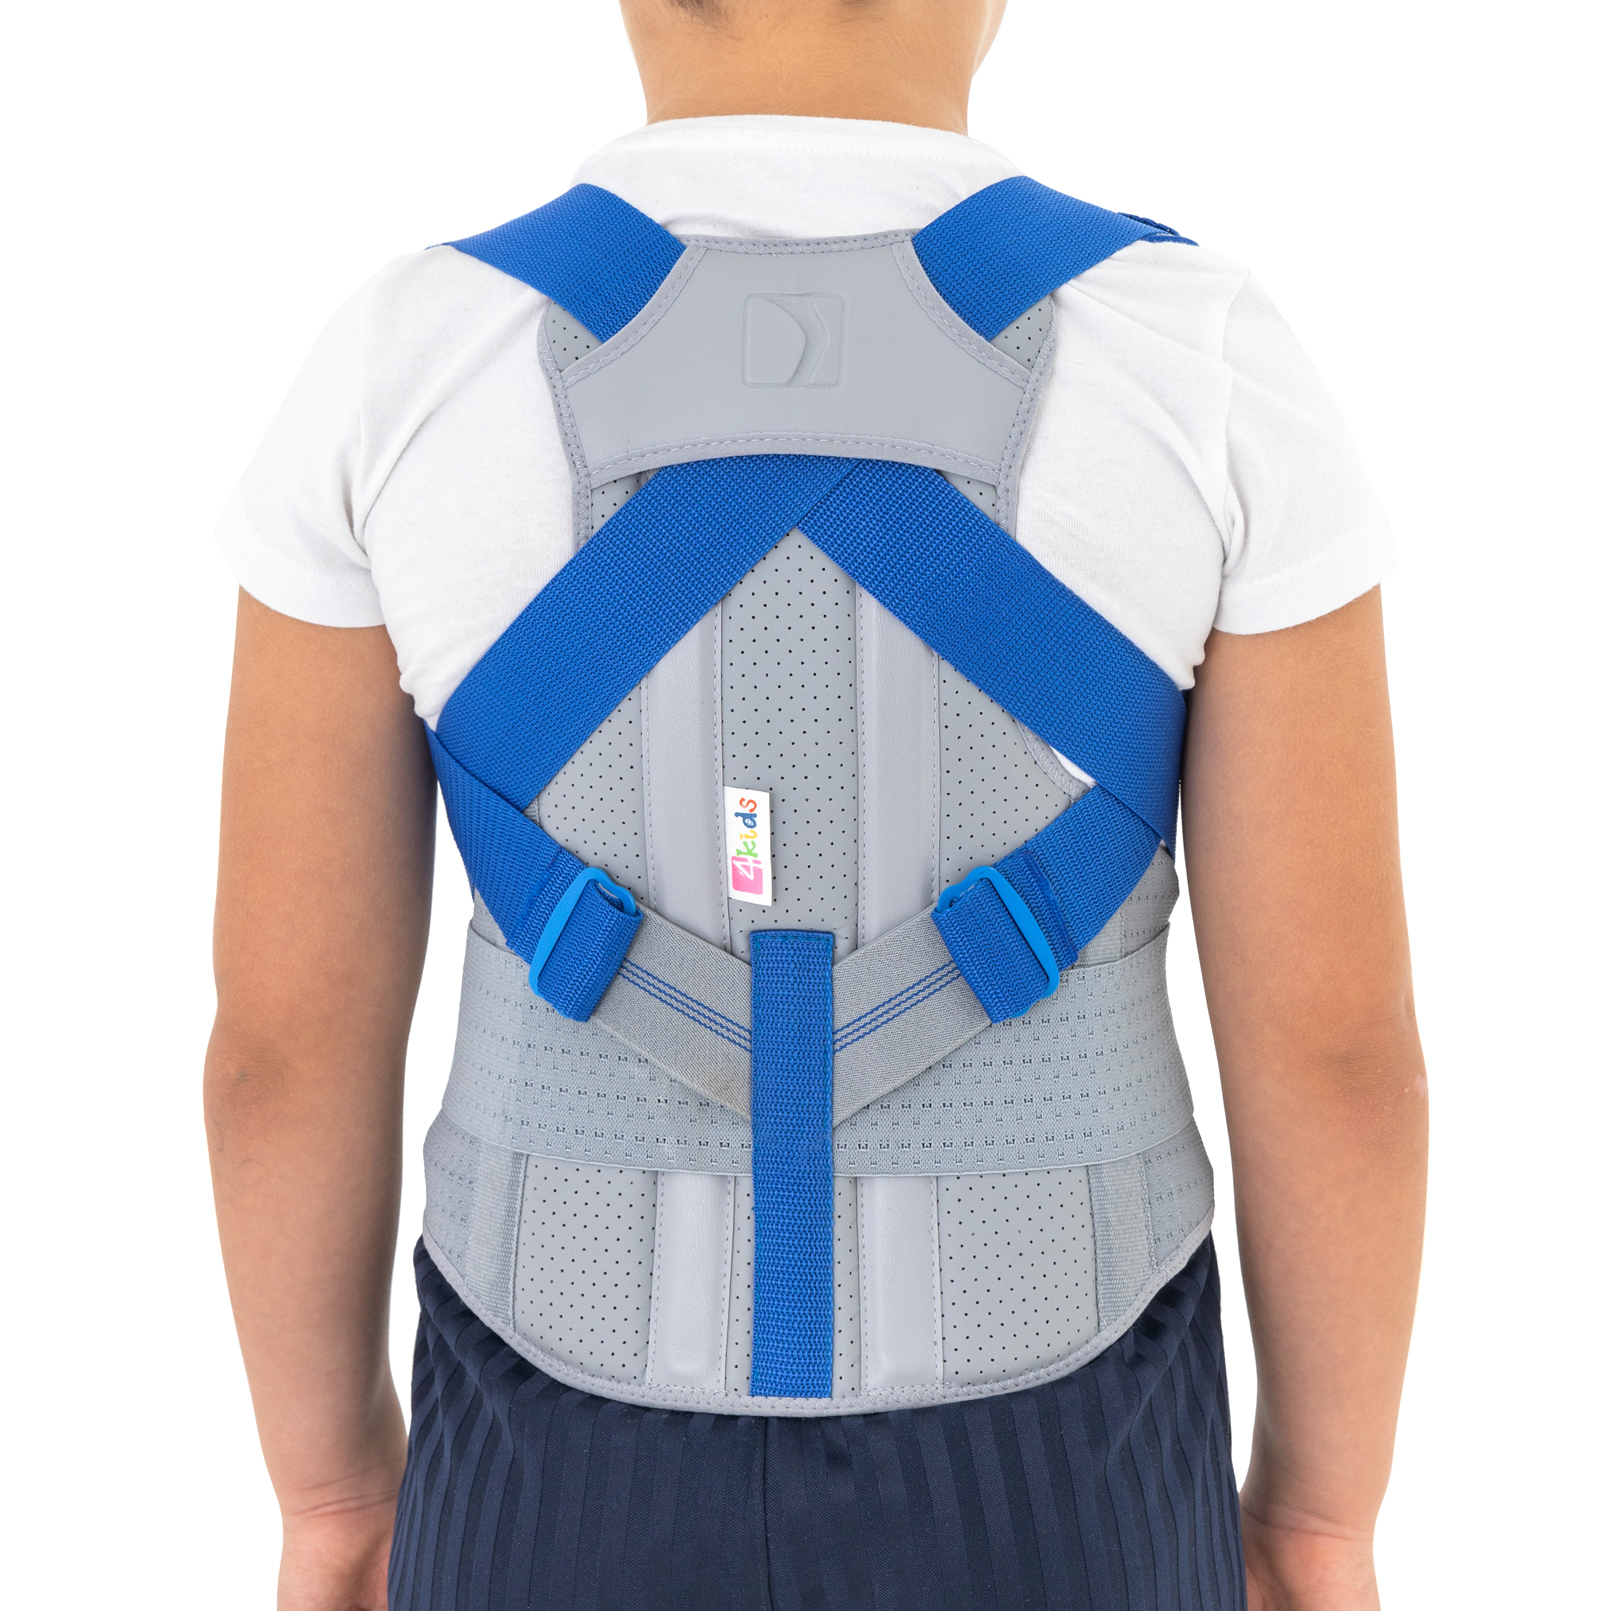 airy' scoliosis brace is created for young girls to wear confidently